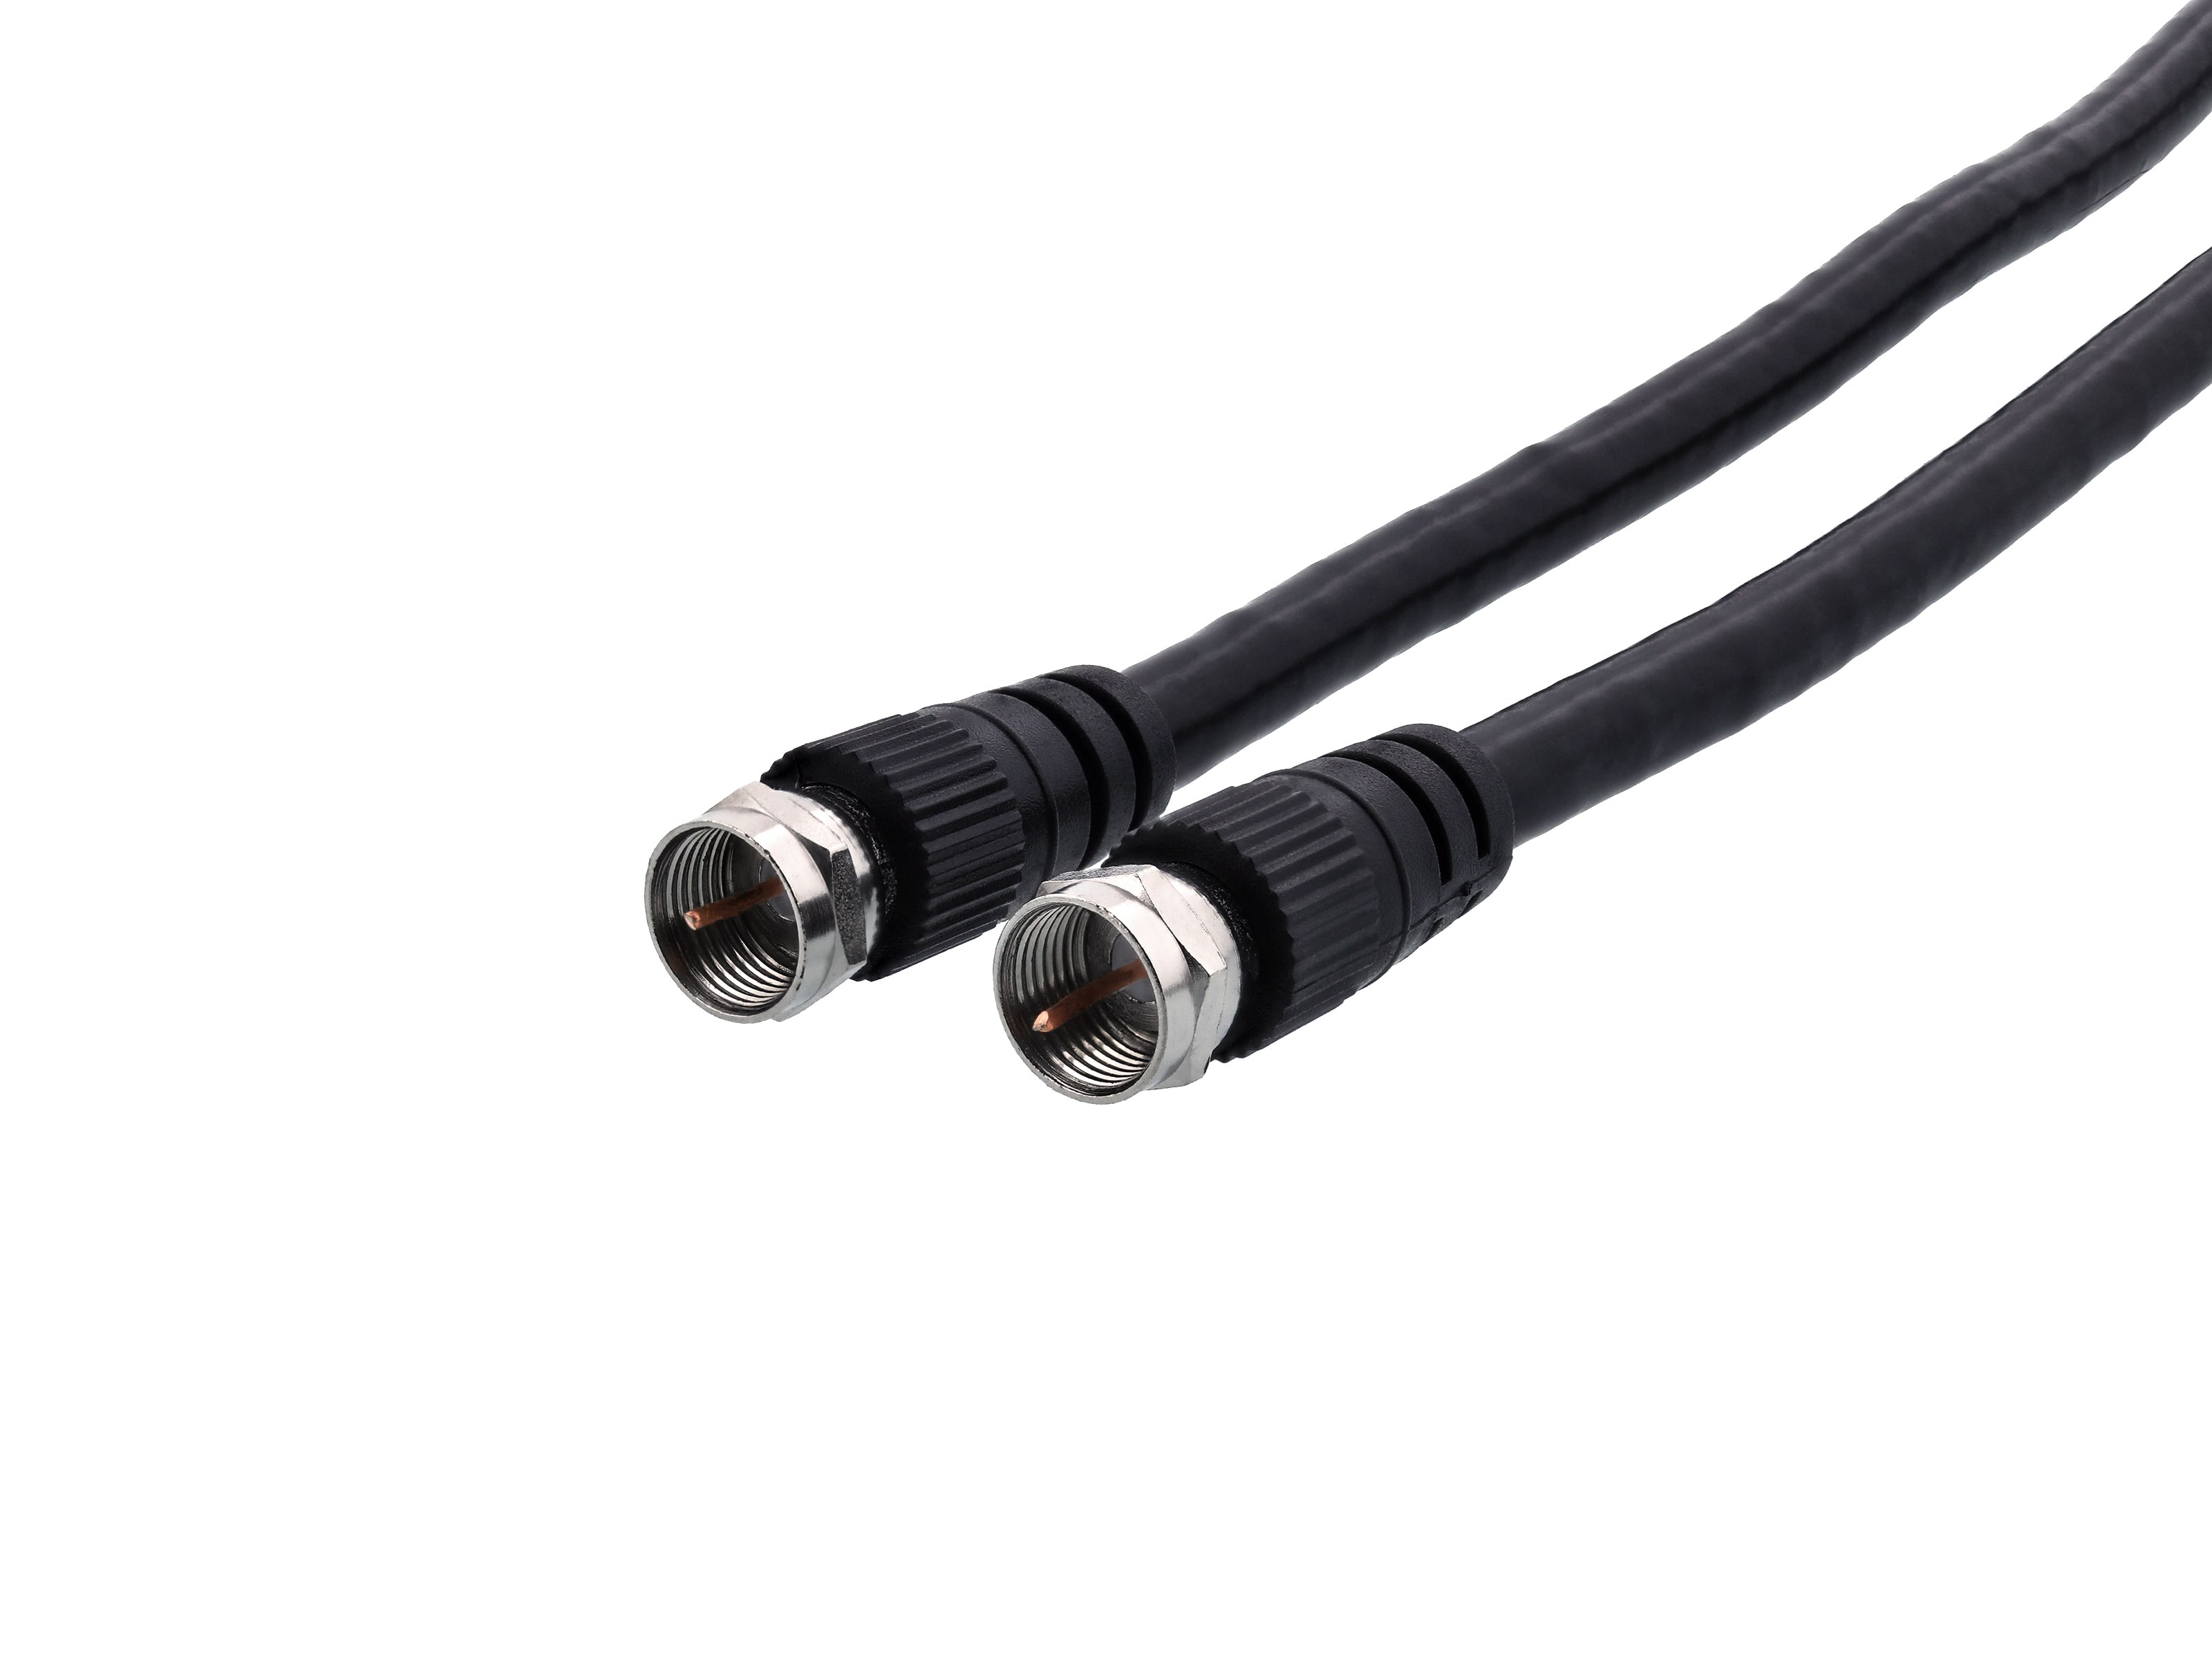 RG6 Coaxial for Cable TV - 3 ft, F Type, Black